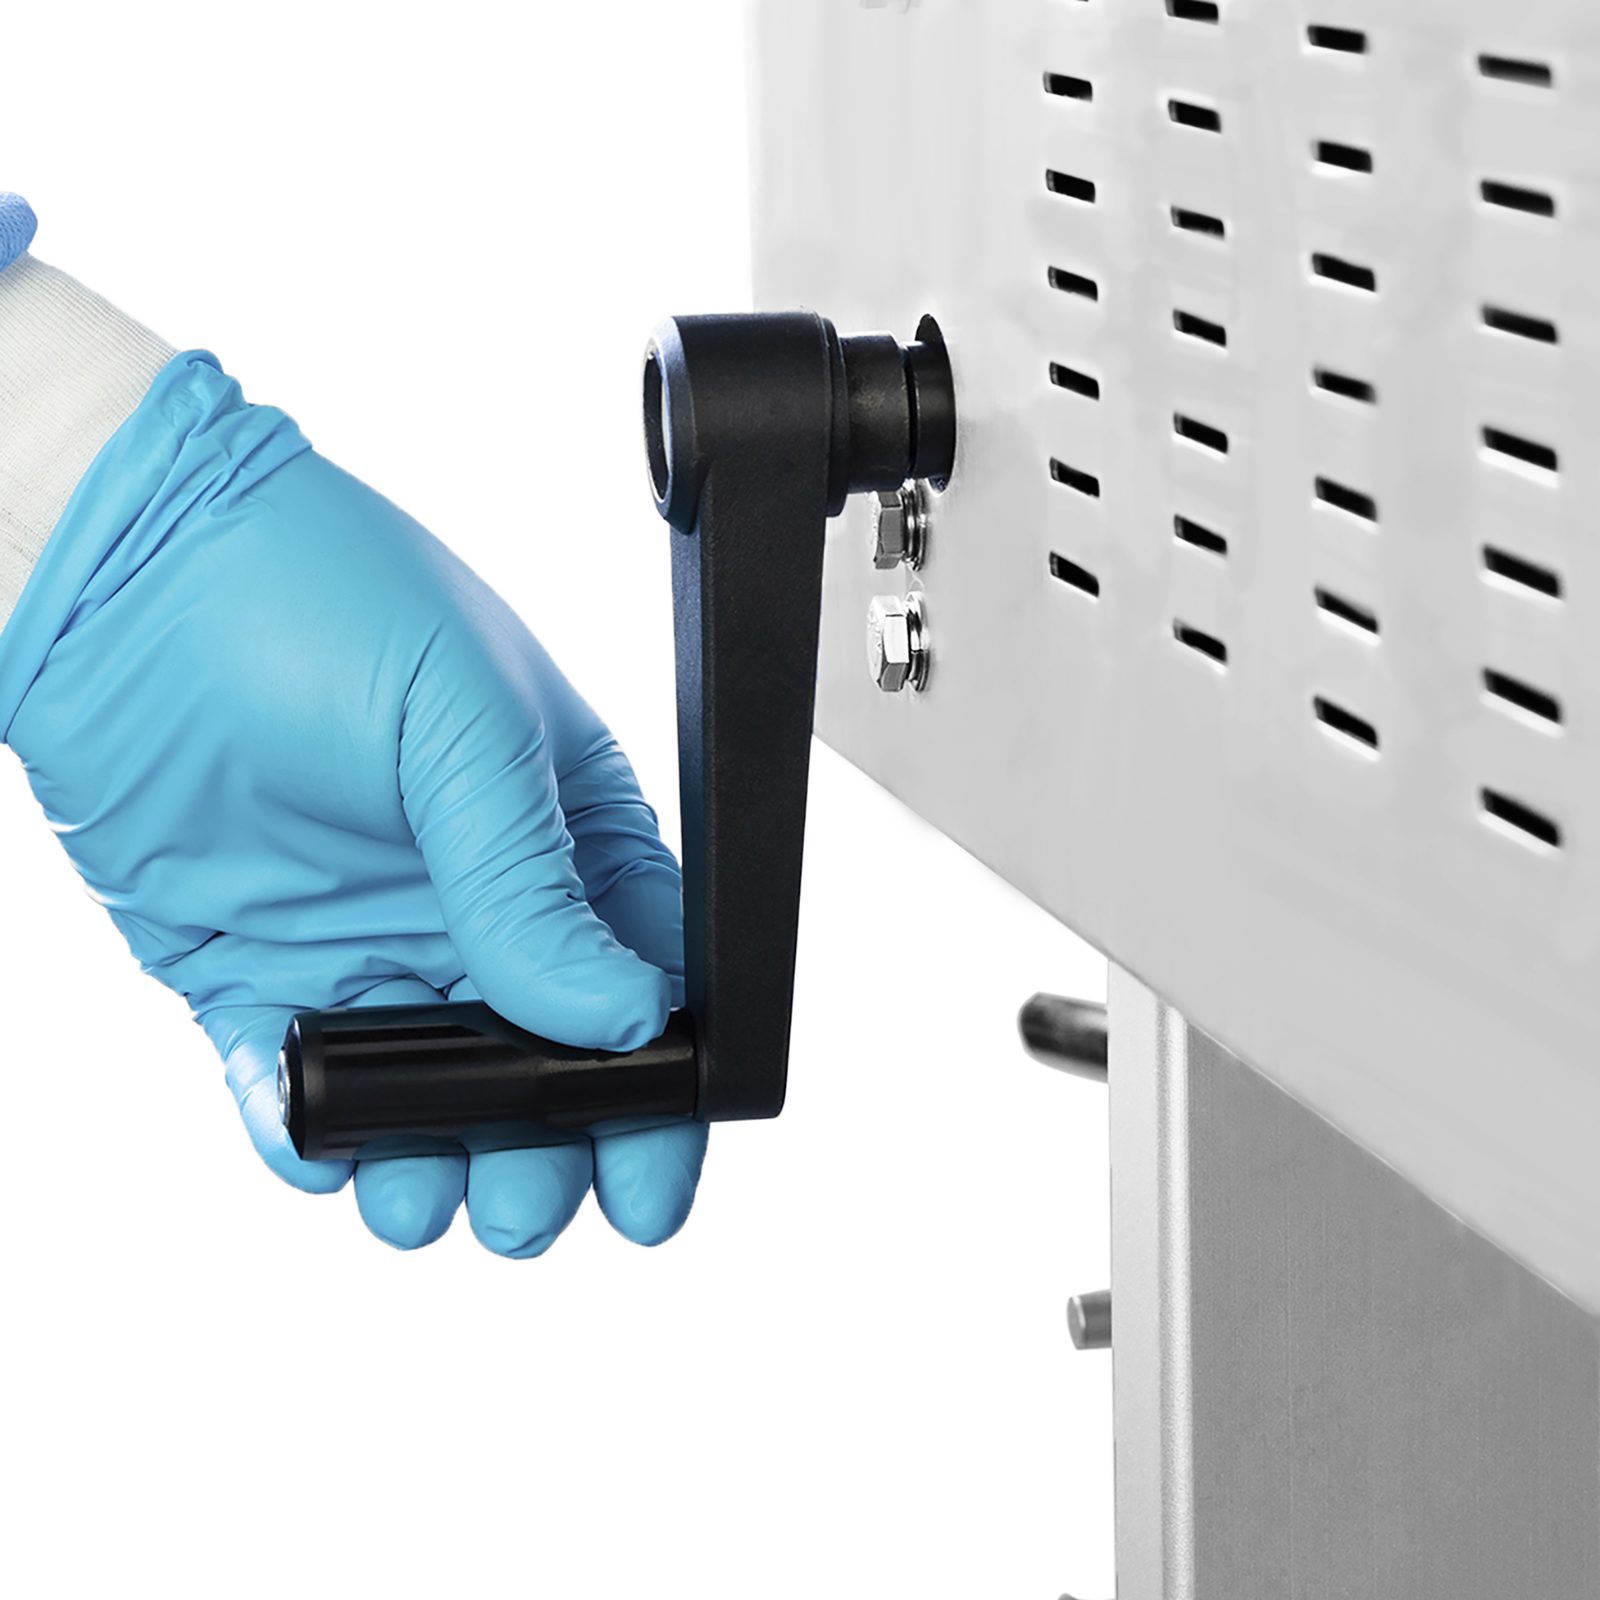 Operator wearing blue gloves adjusting the height of the sealing machine with the black removable handle before starting production